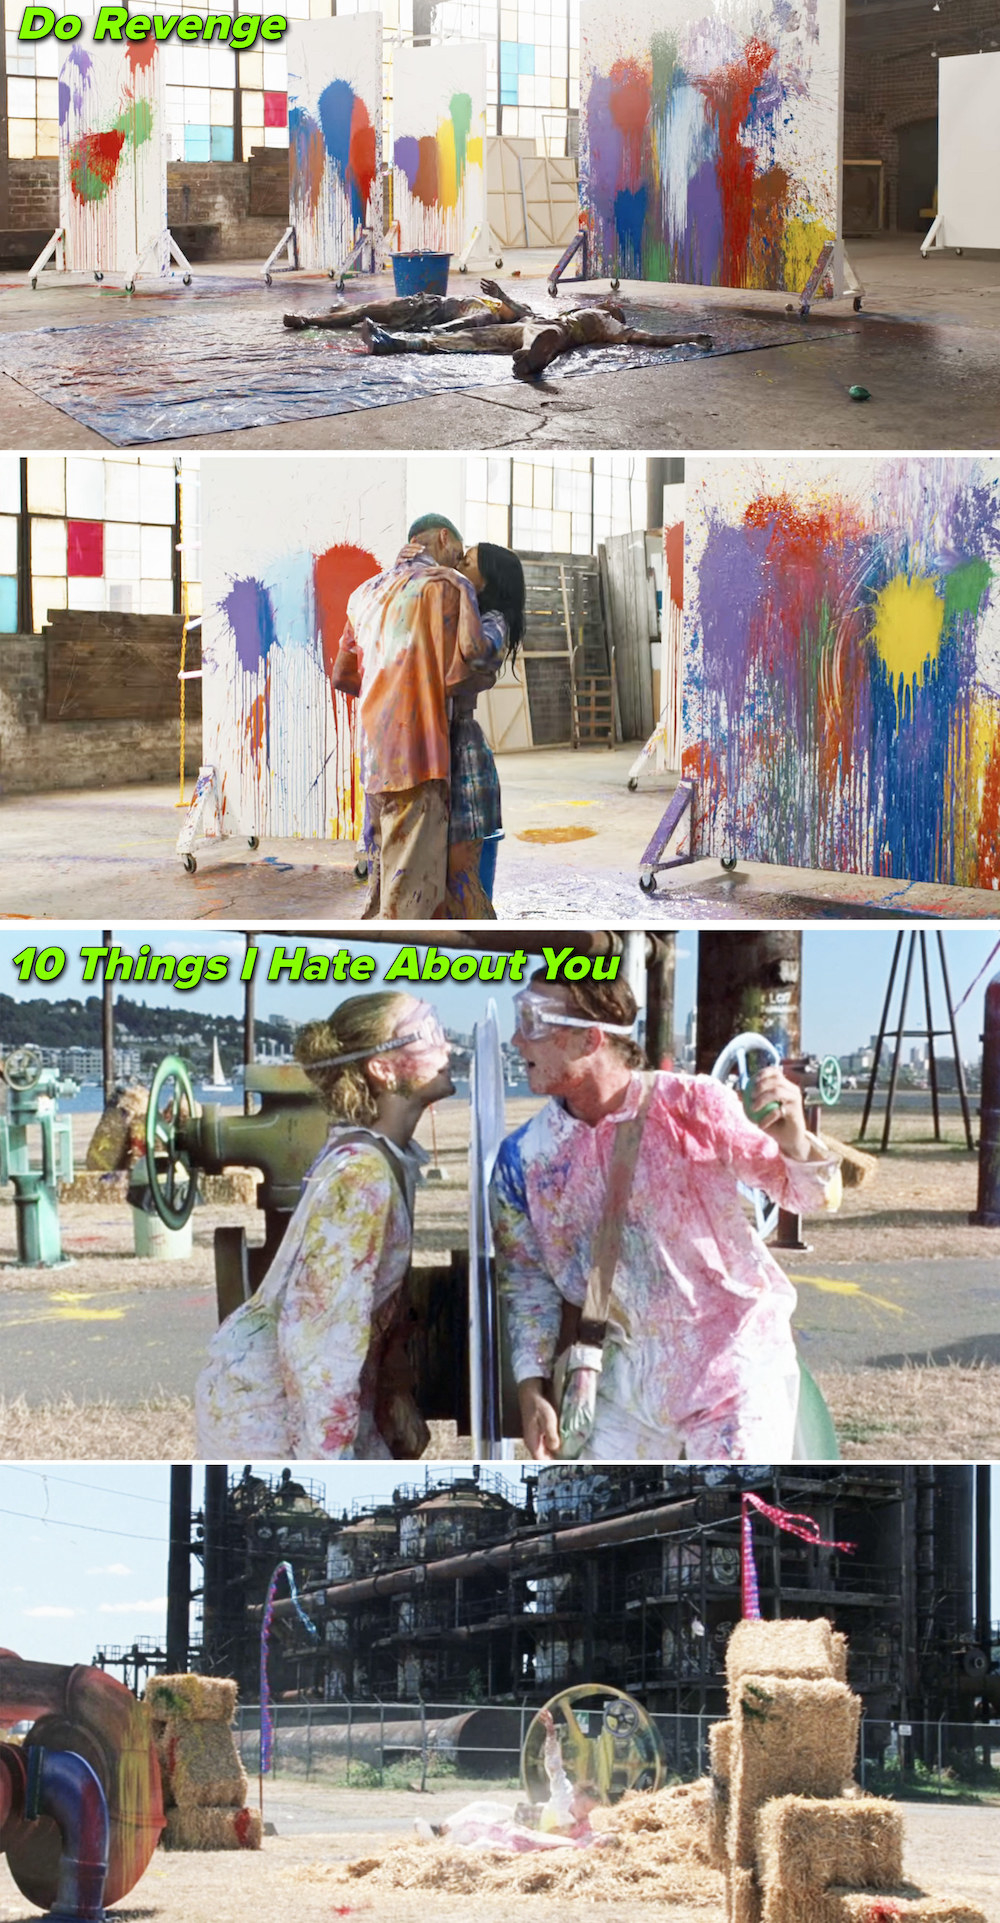 Paint ball scene in &quot;Do Revenge&quot; vs. &quot;10 Things I Hate About You&quot;